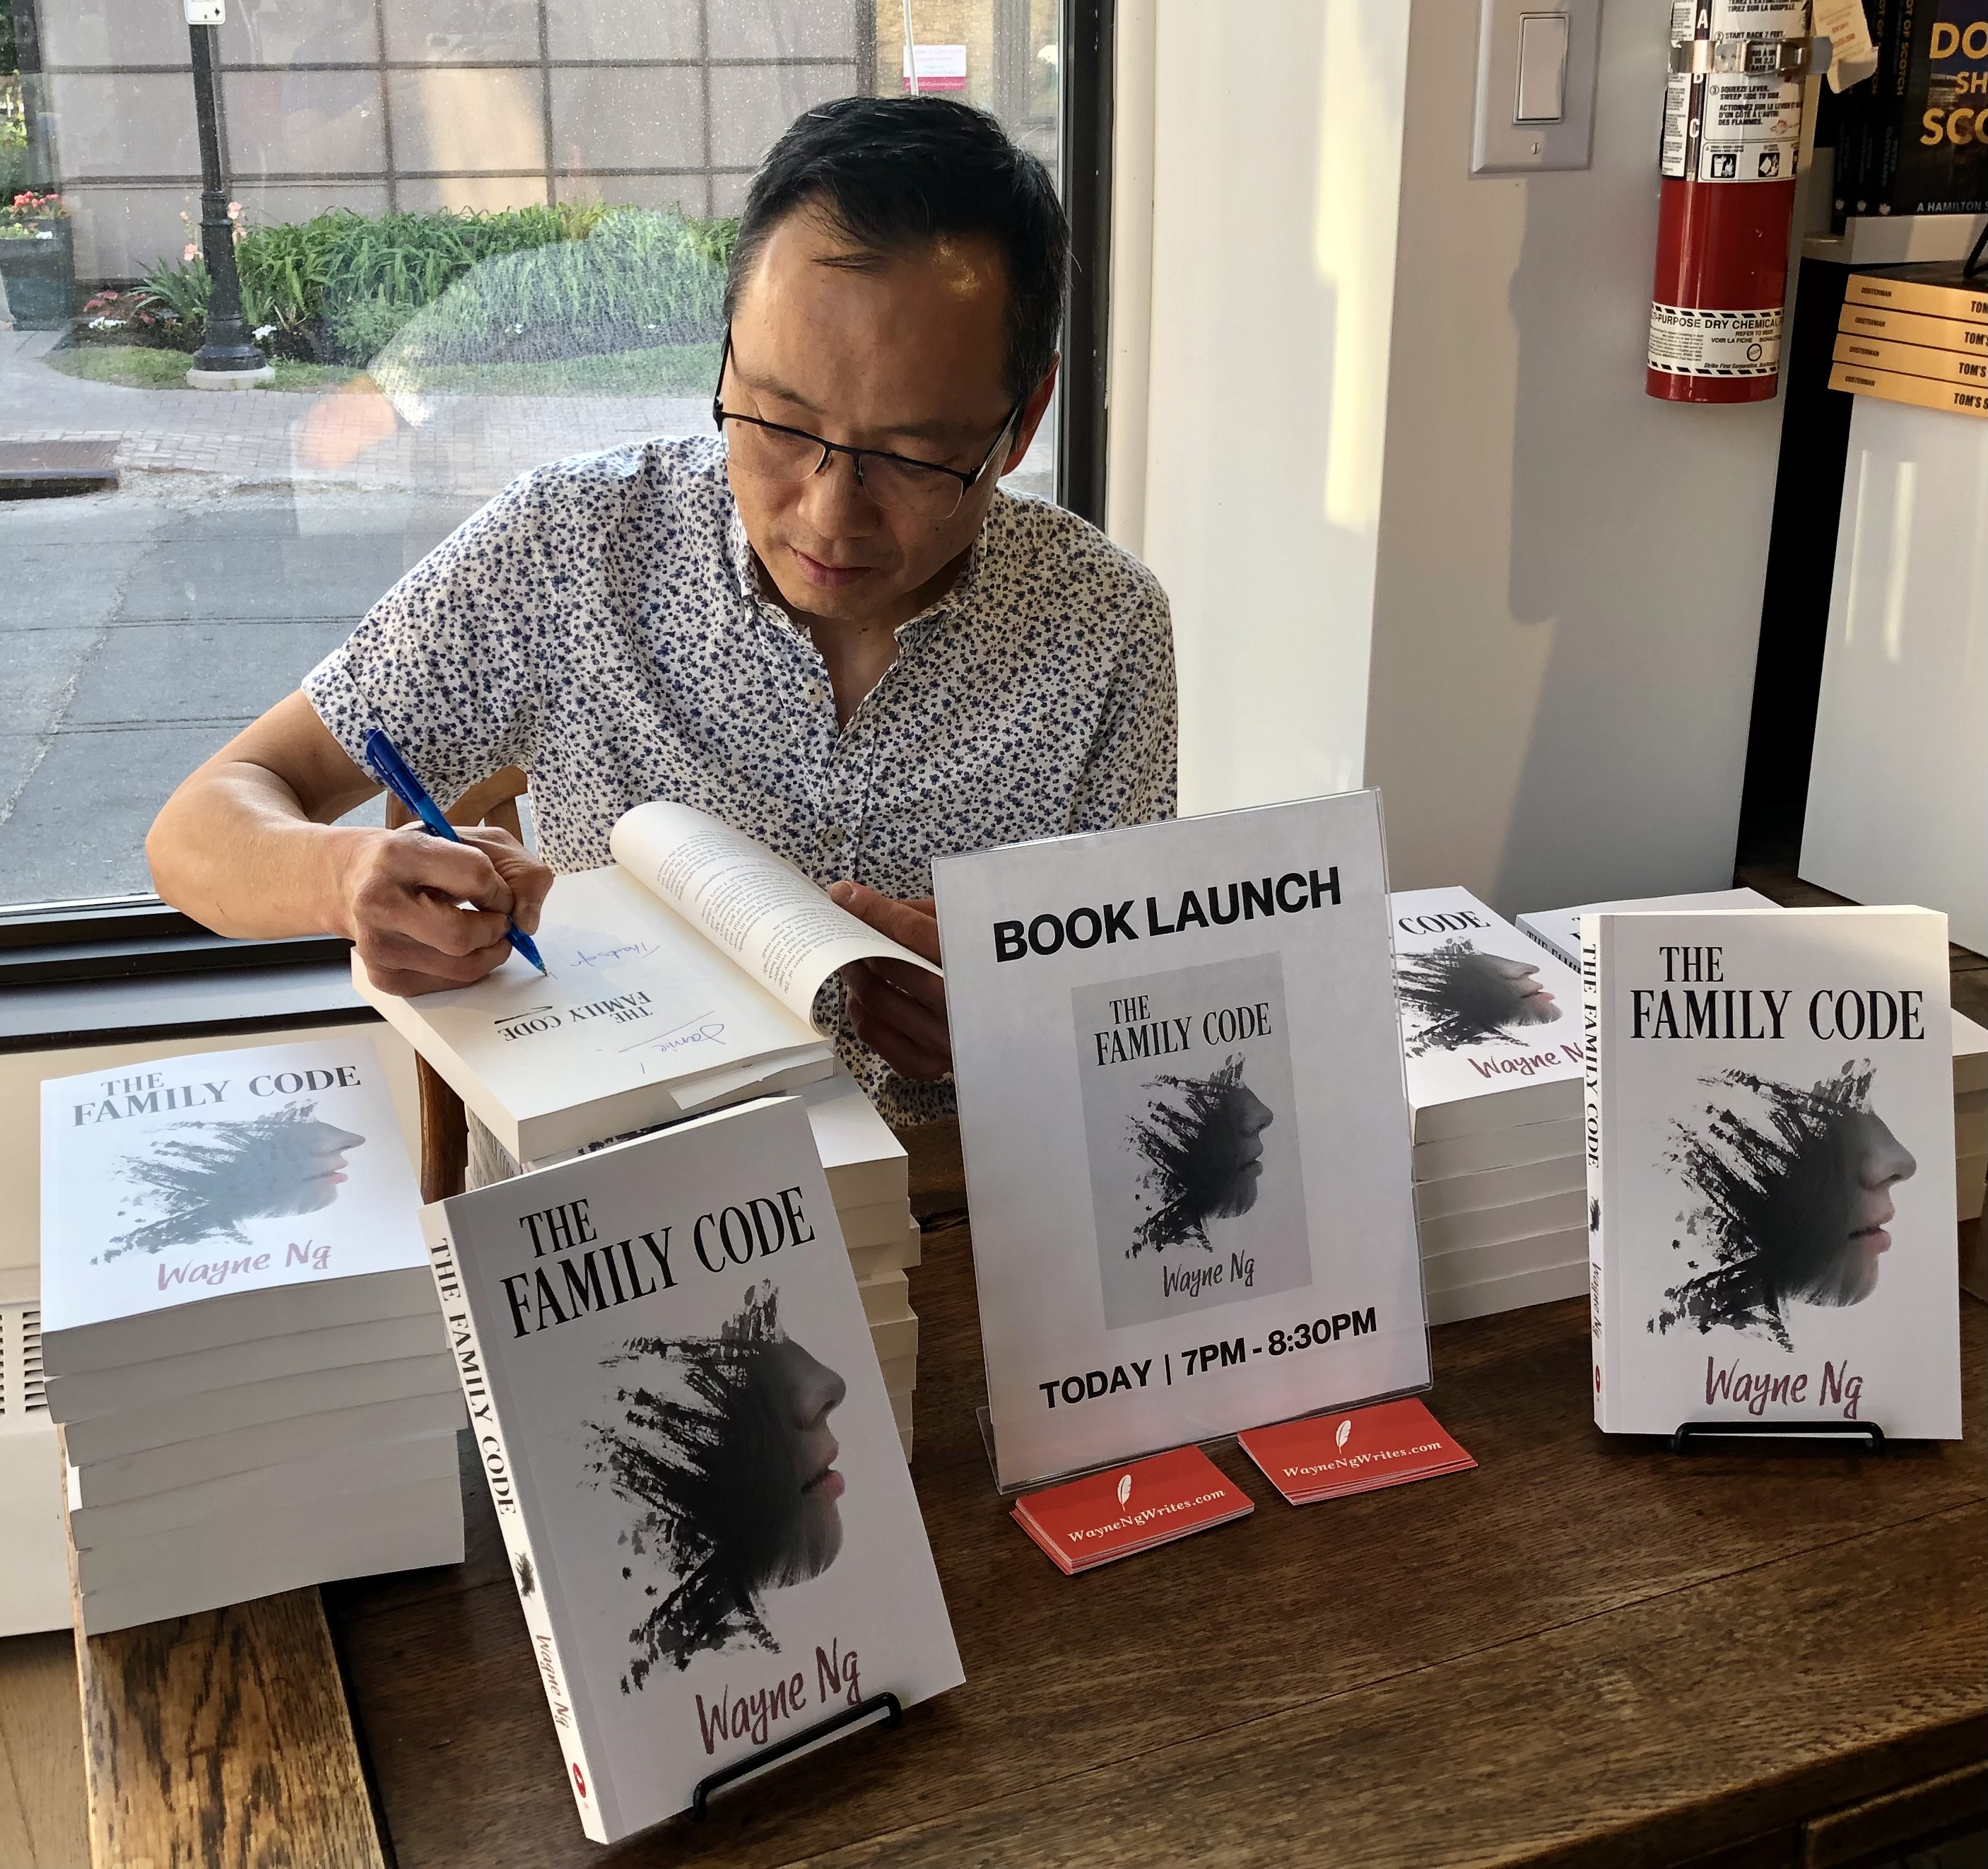 Wayne Ng signing books at the launch of THE FAMILY CODE at The Spaniel's Tale Bookstore